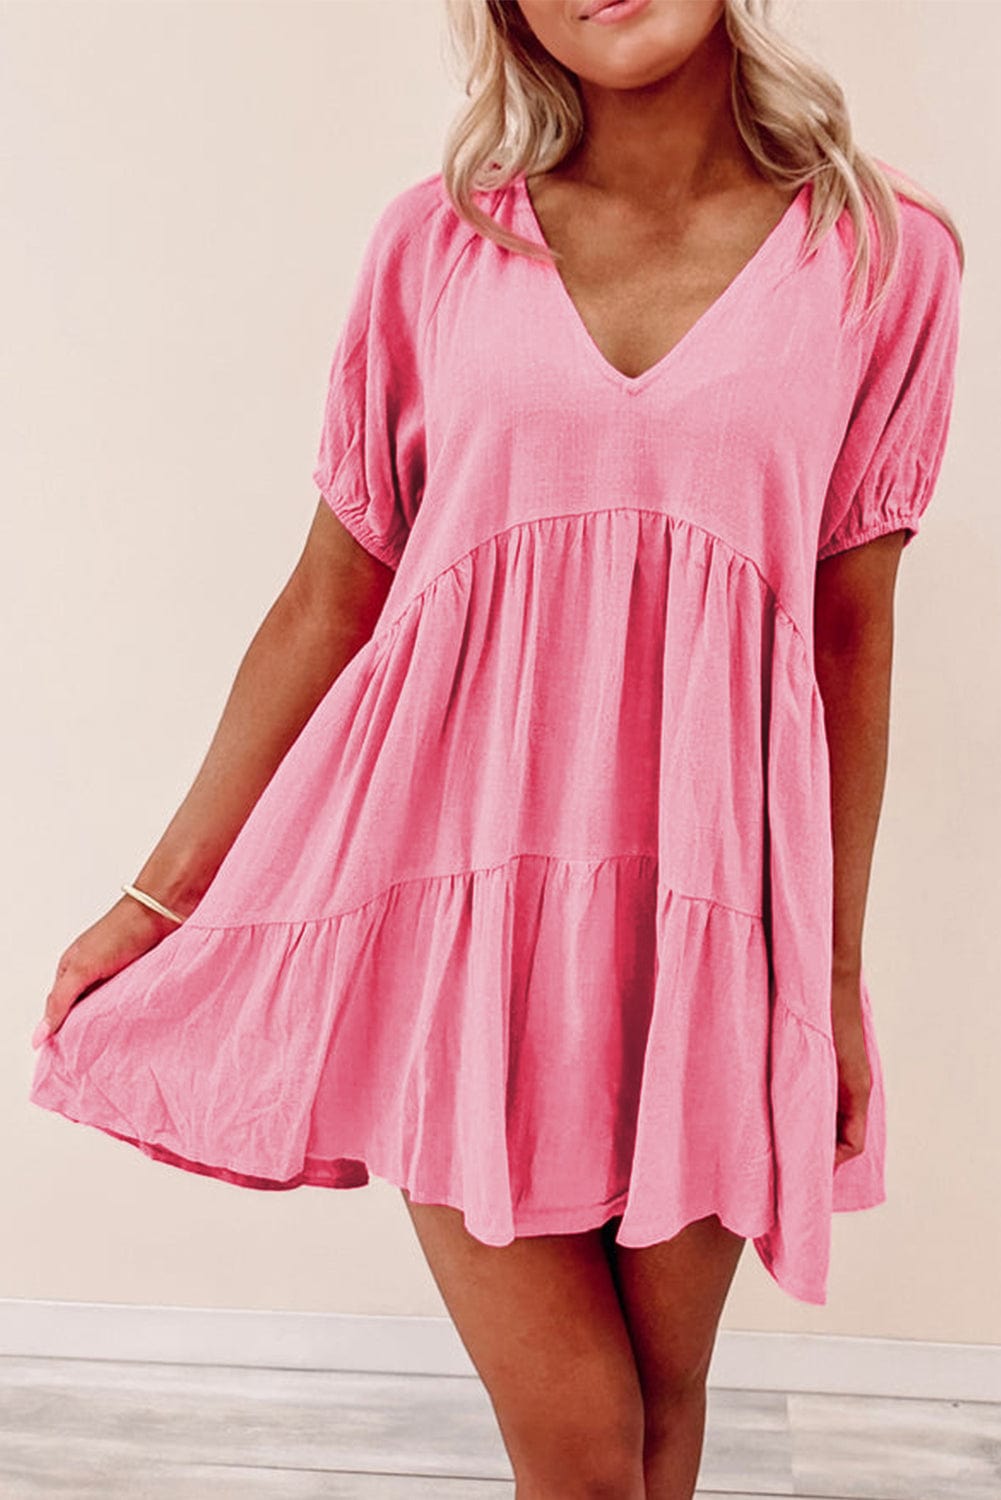 The802Gypsy  Dresses/Mini Dresses Strawberry Pink / S / 80%Viscose+20%Linen TRAVELING GYPSY-V Neck Tiered Swing Dress